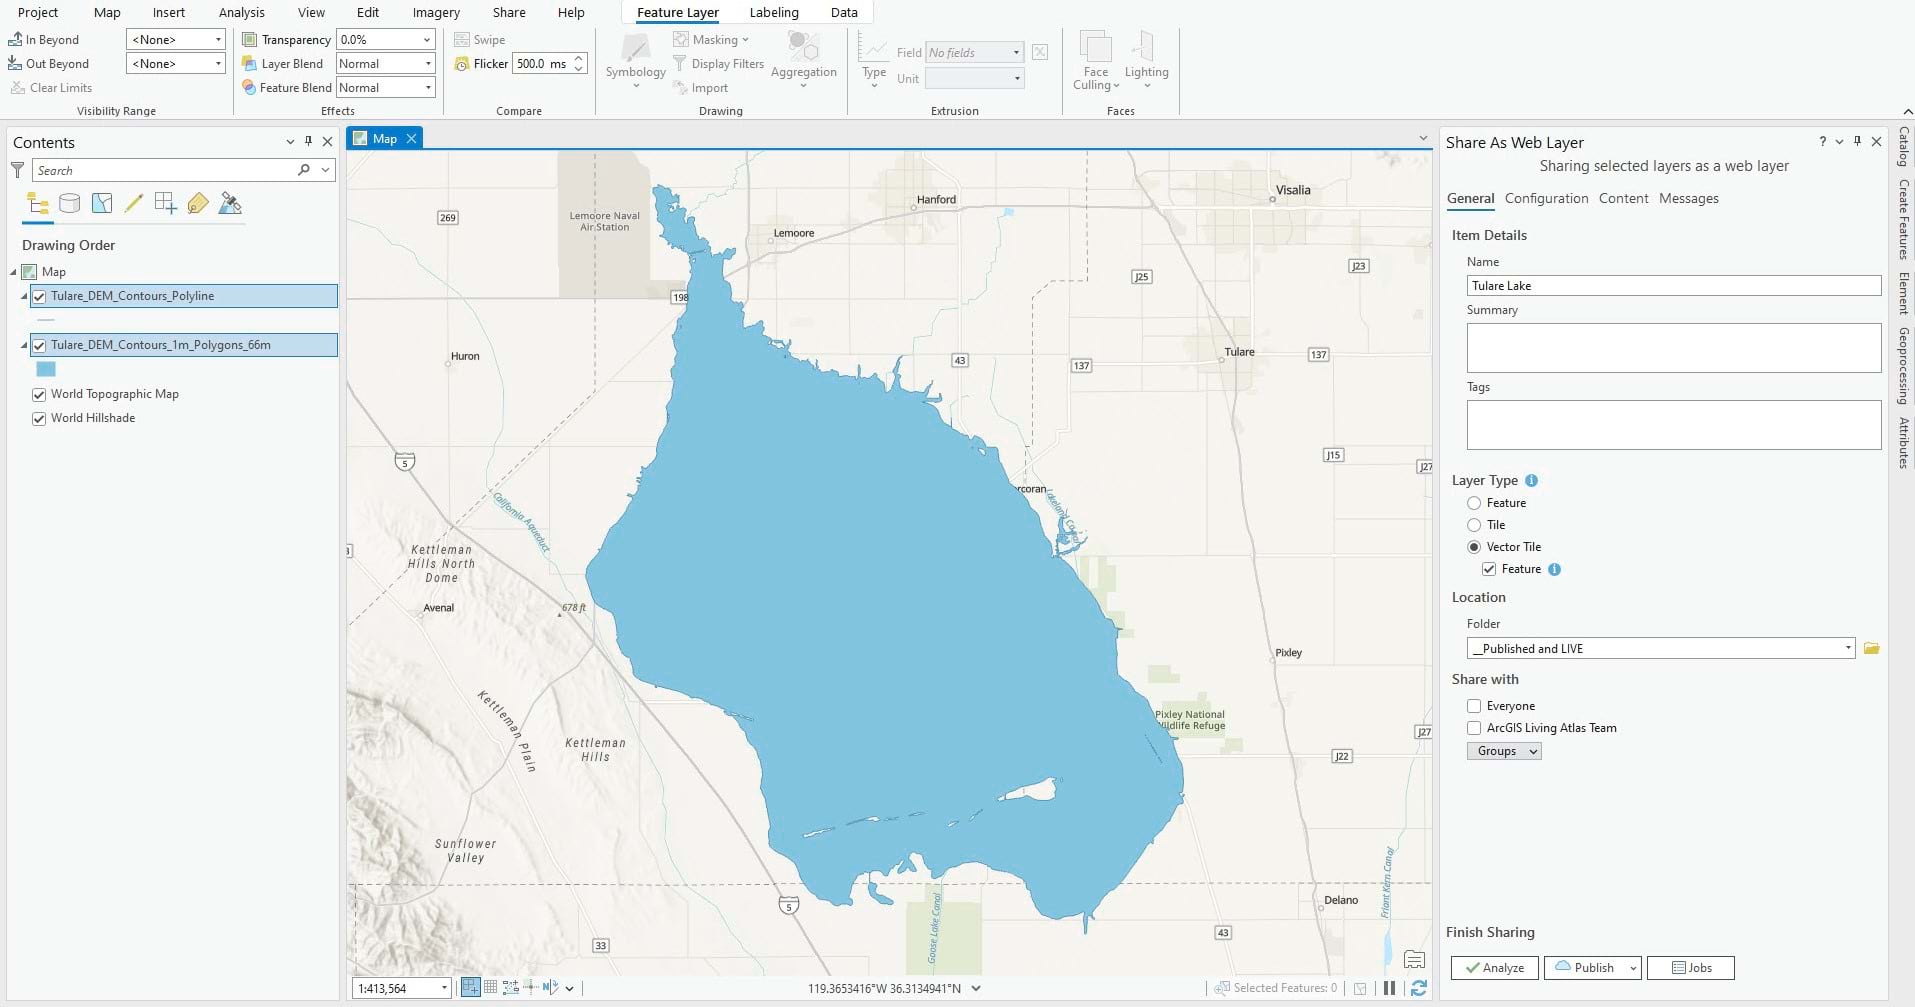 Image of ArcGIS Pro and two layers being published as Vector Tiles to ArcGIS Online.